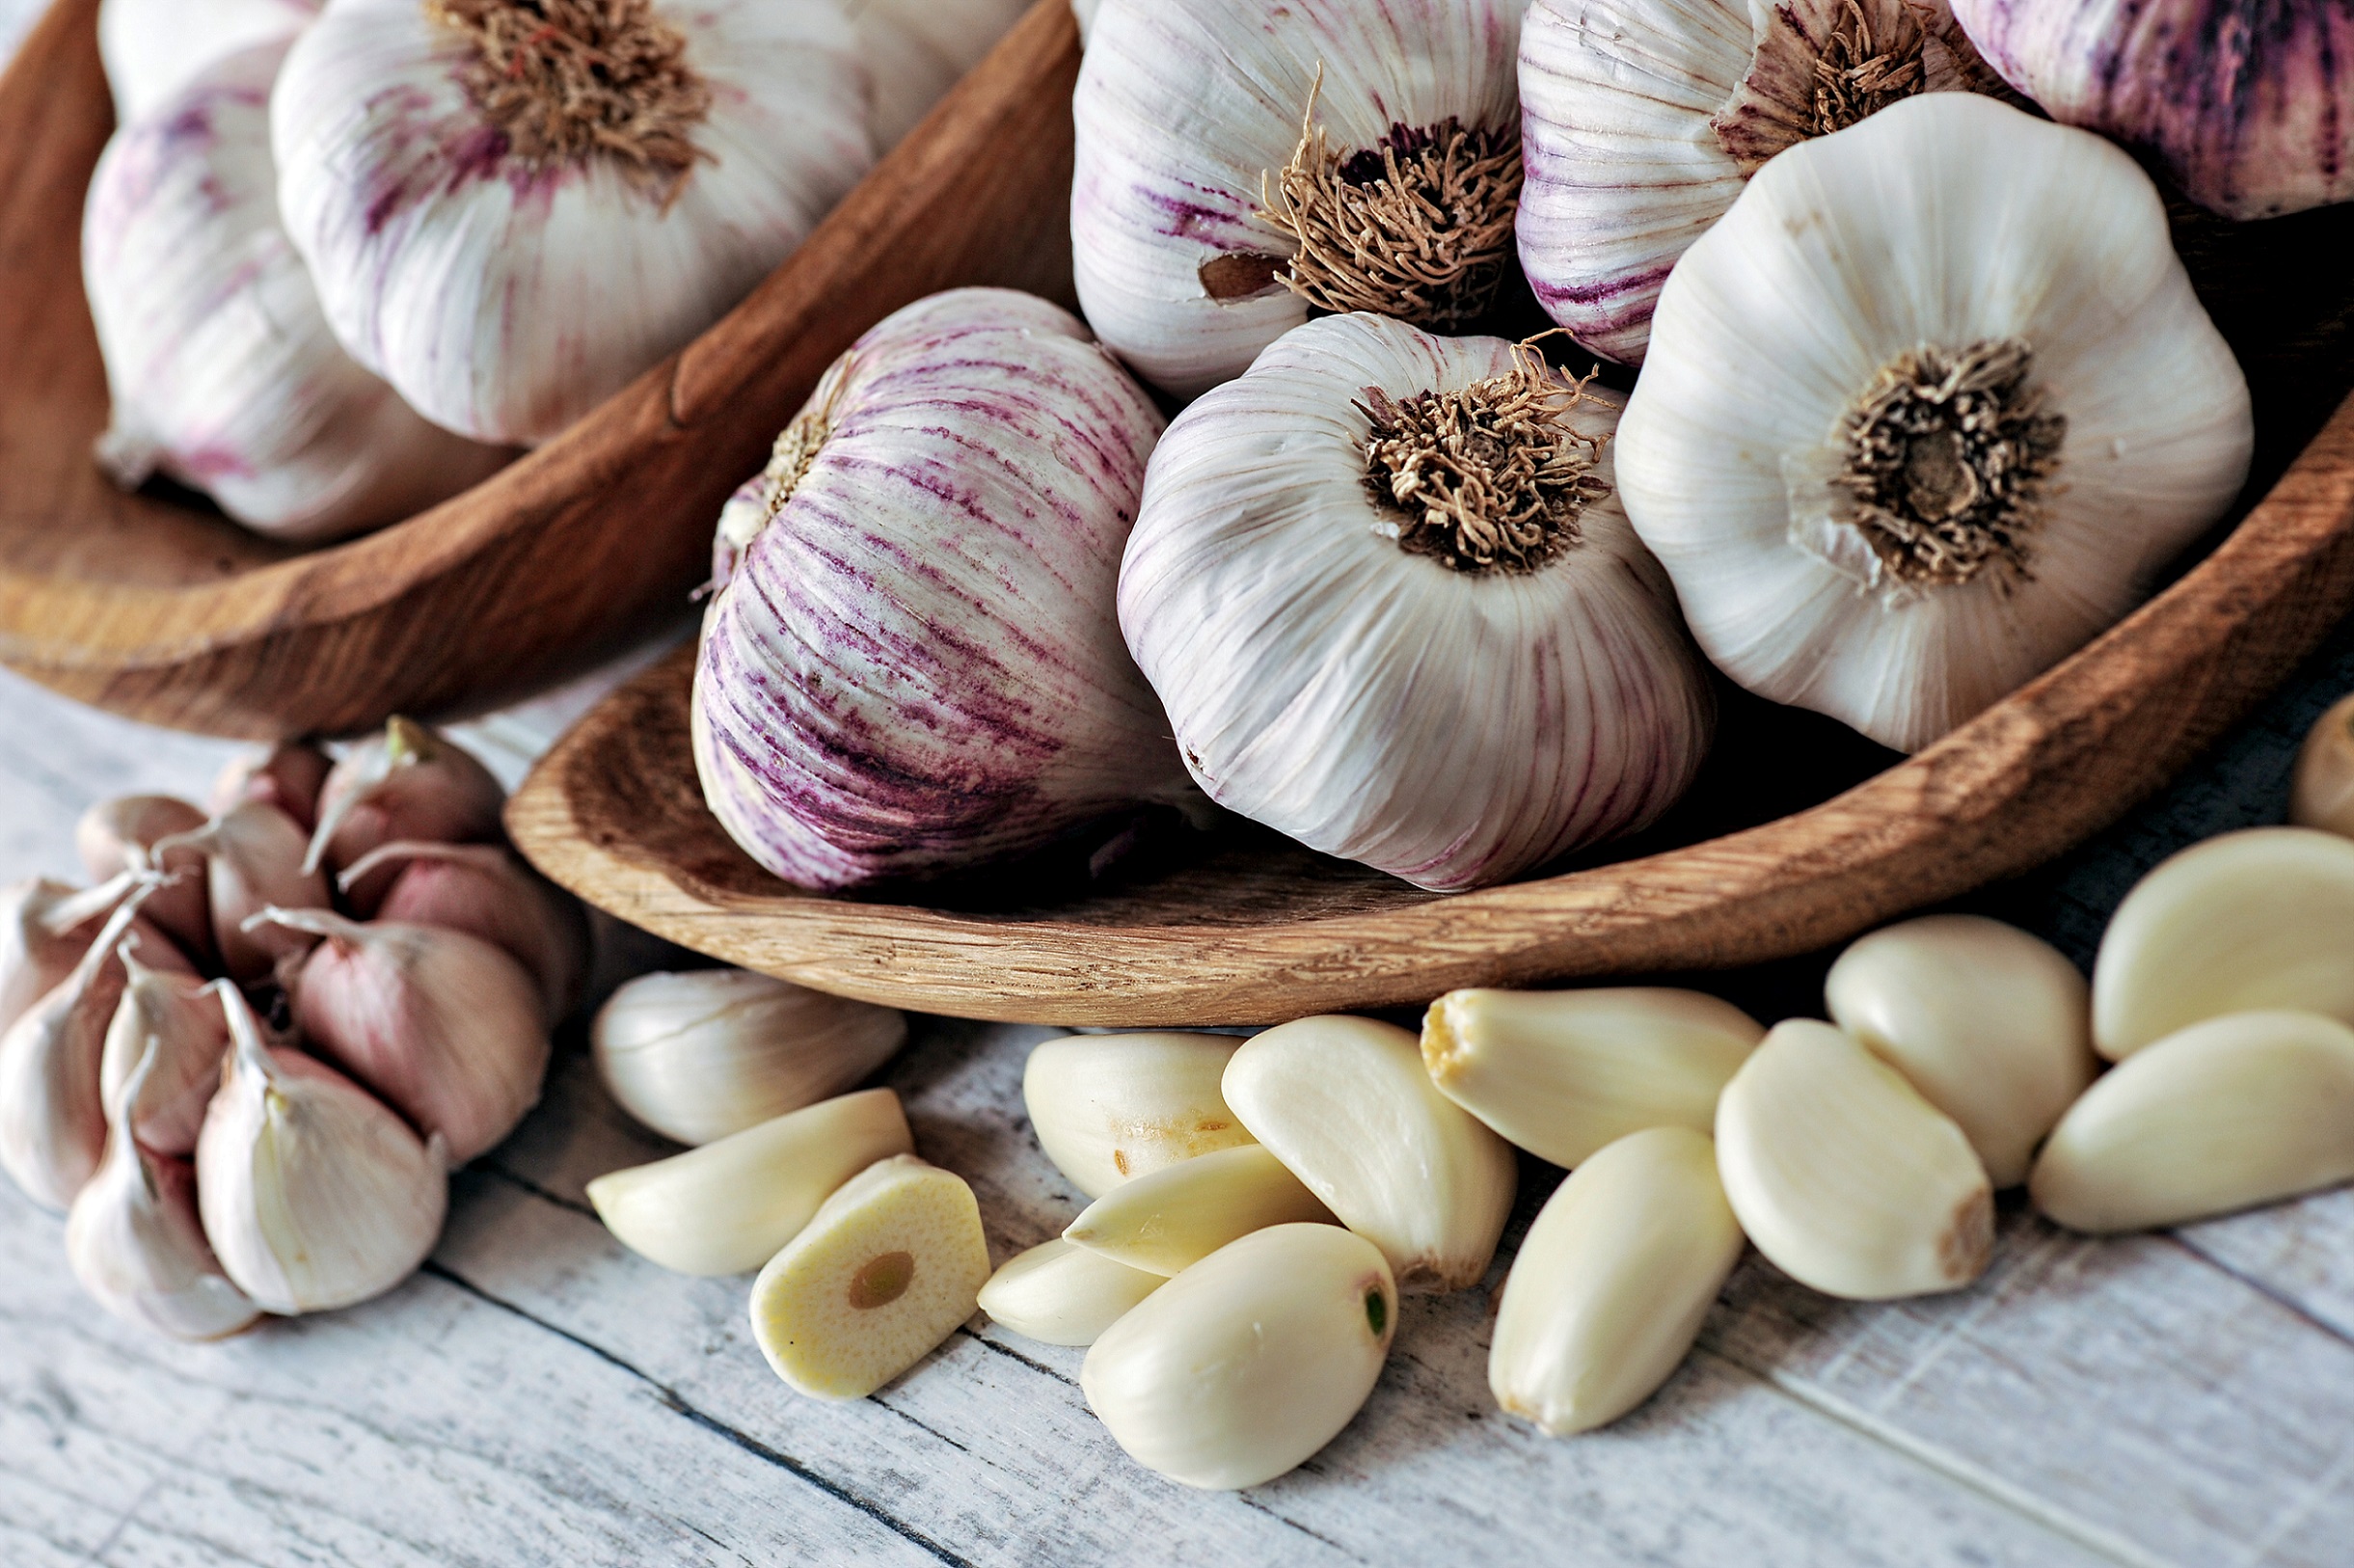 Garlic reduces oxidative stress and protects against many diseases